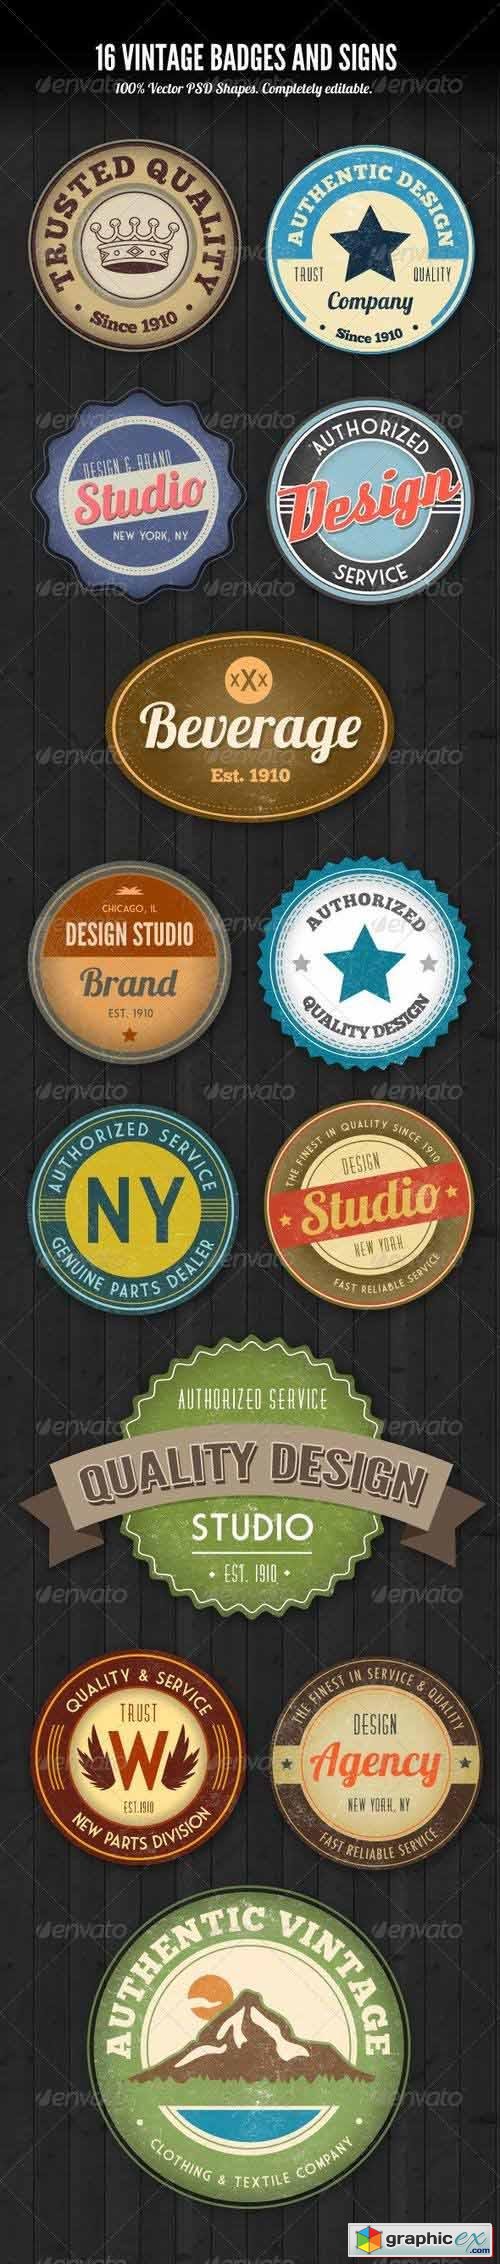 PSD Vintage Style Badges and Logos